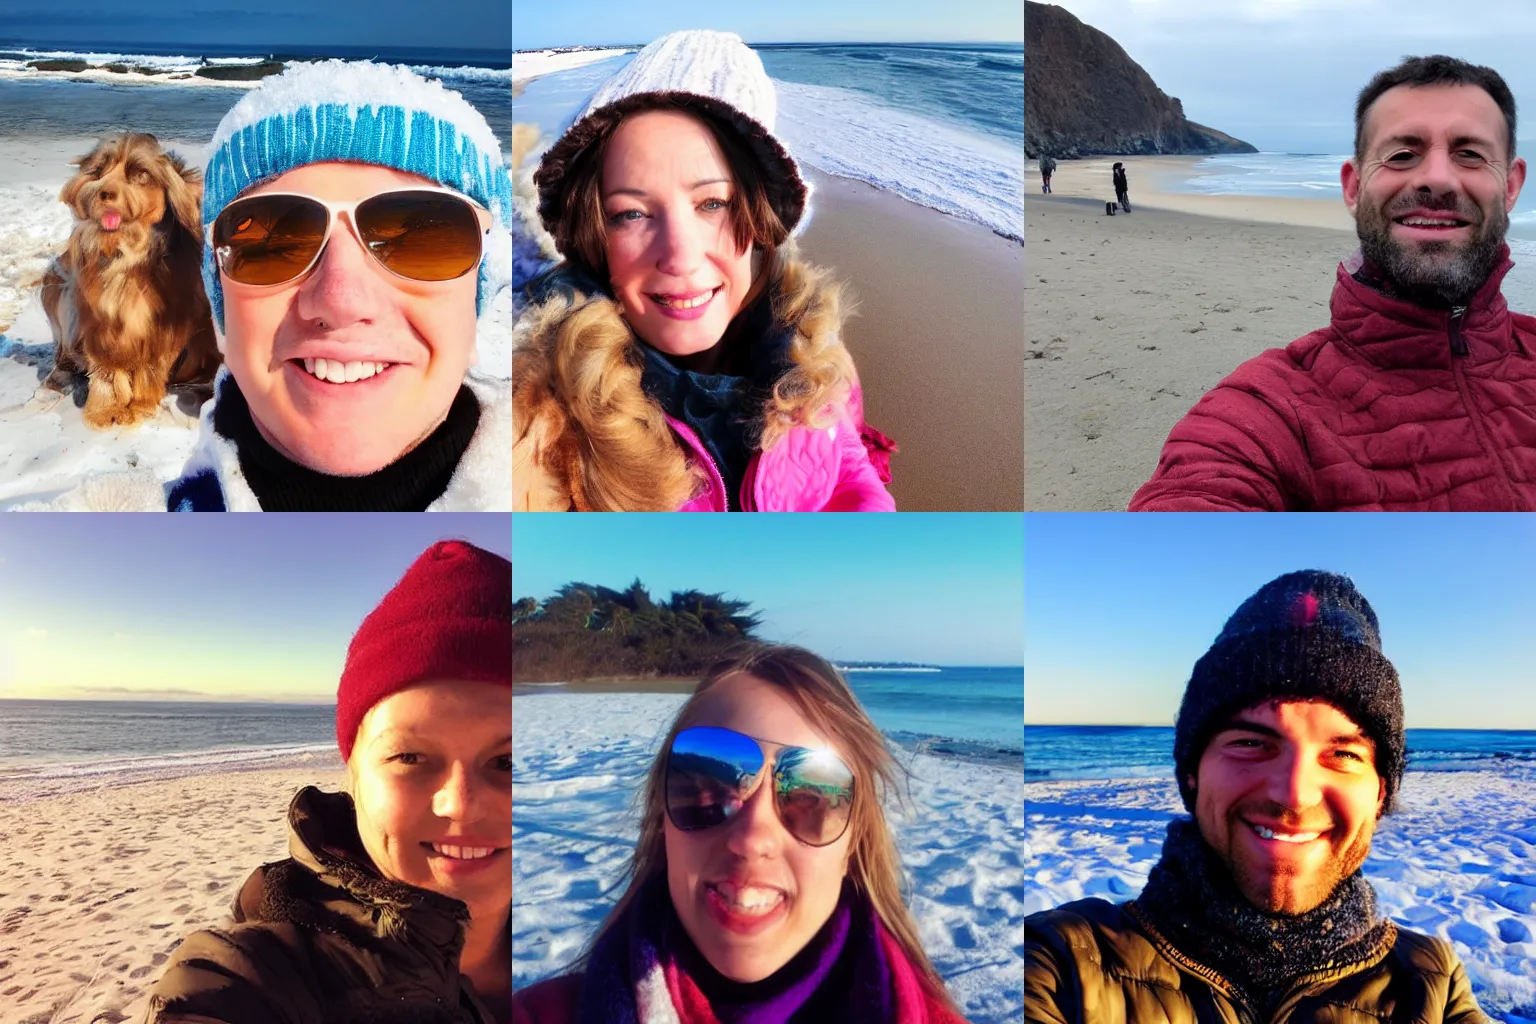 Prompt: Selfie taken on a beach during the winter